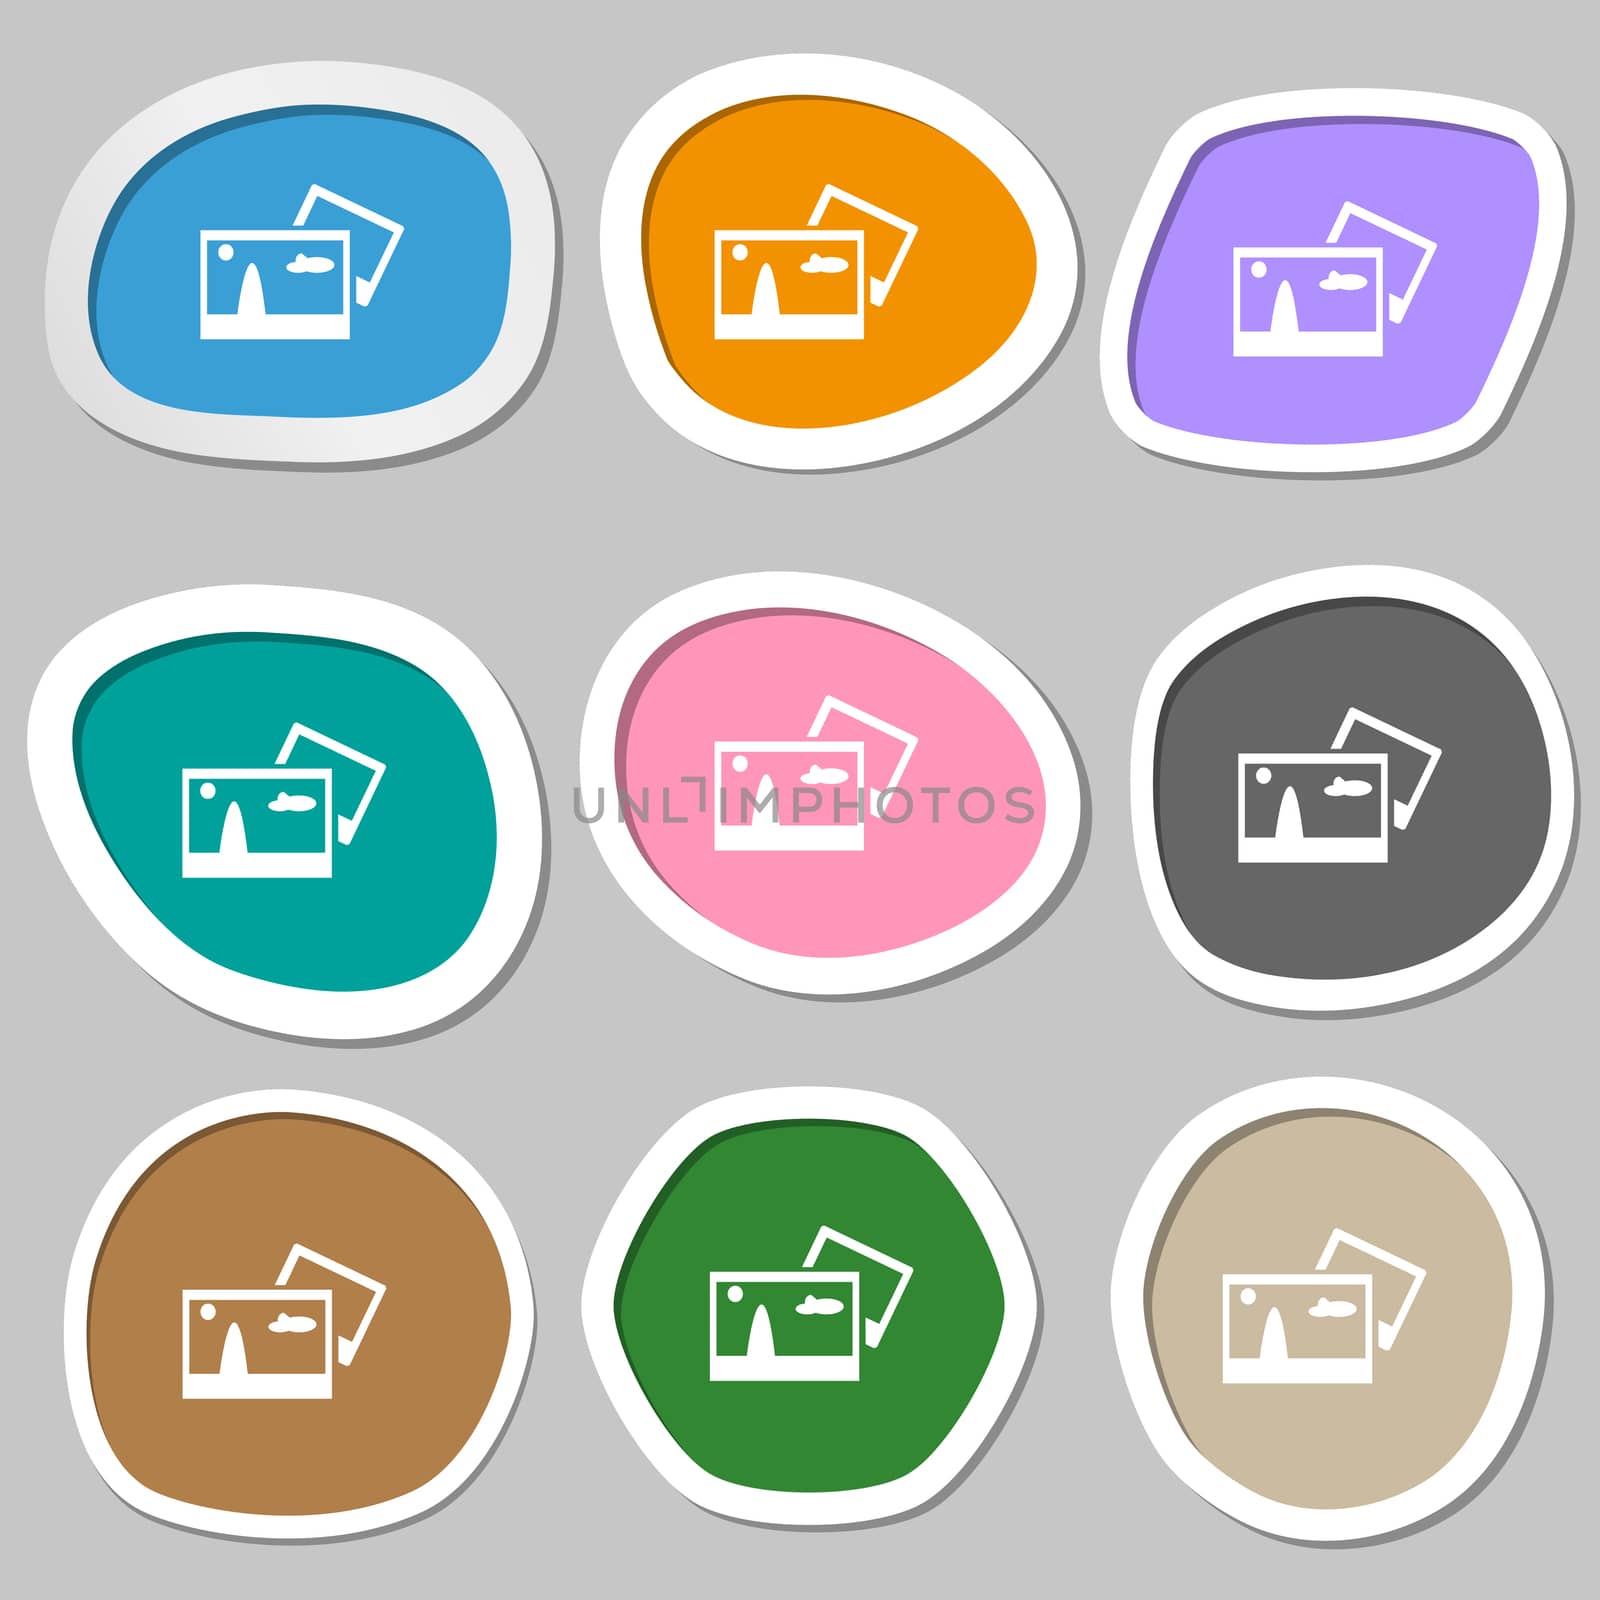 Copy File JPG sign icon. Download image file symbol. Multicolored paper stickers.  by serhii_lohvyniuk